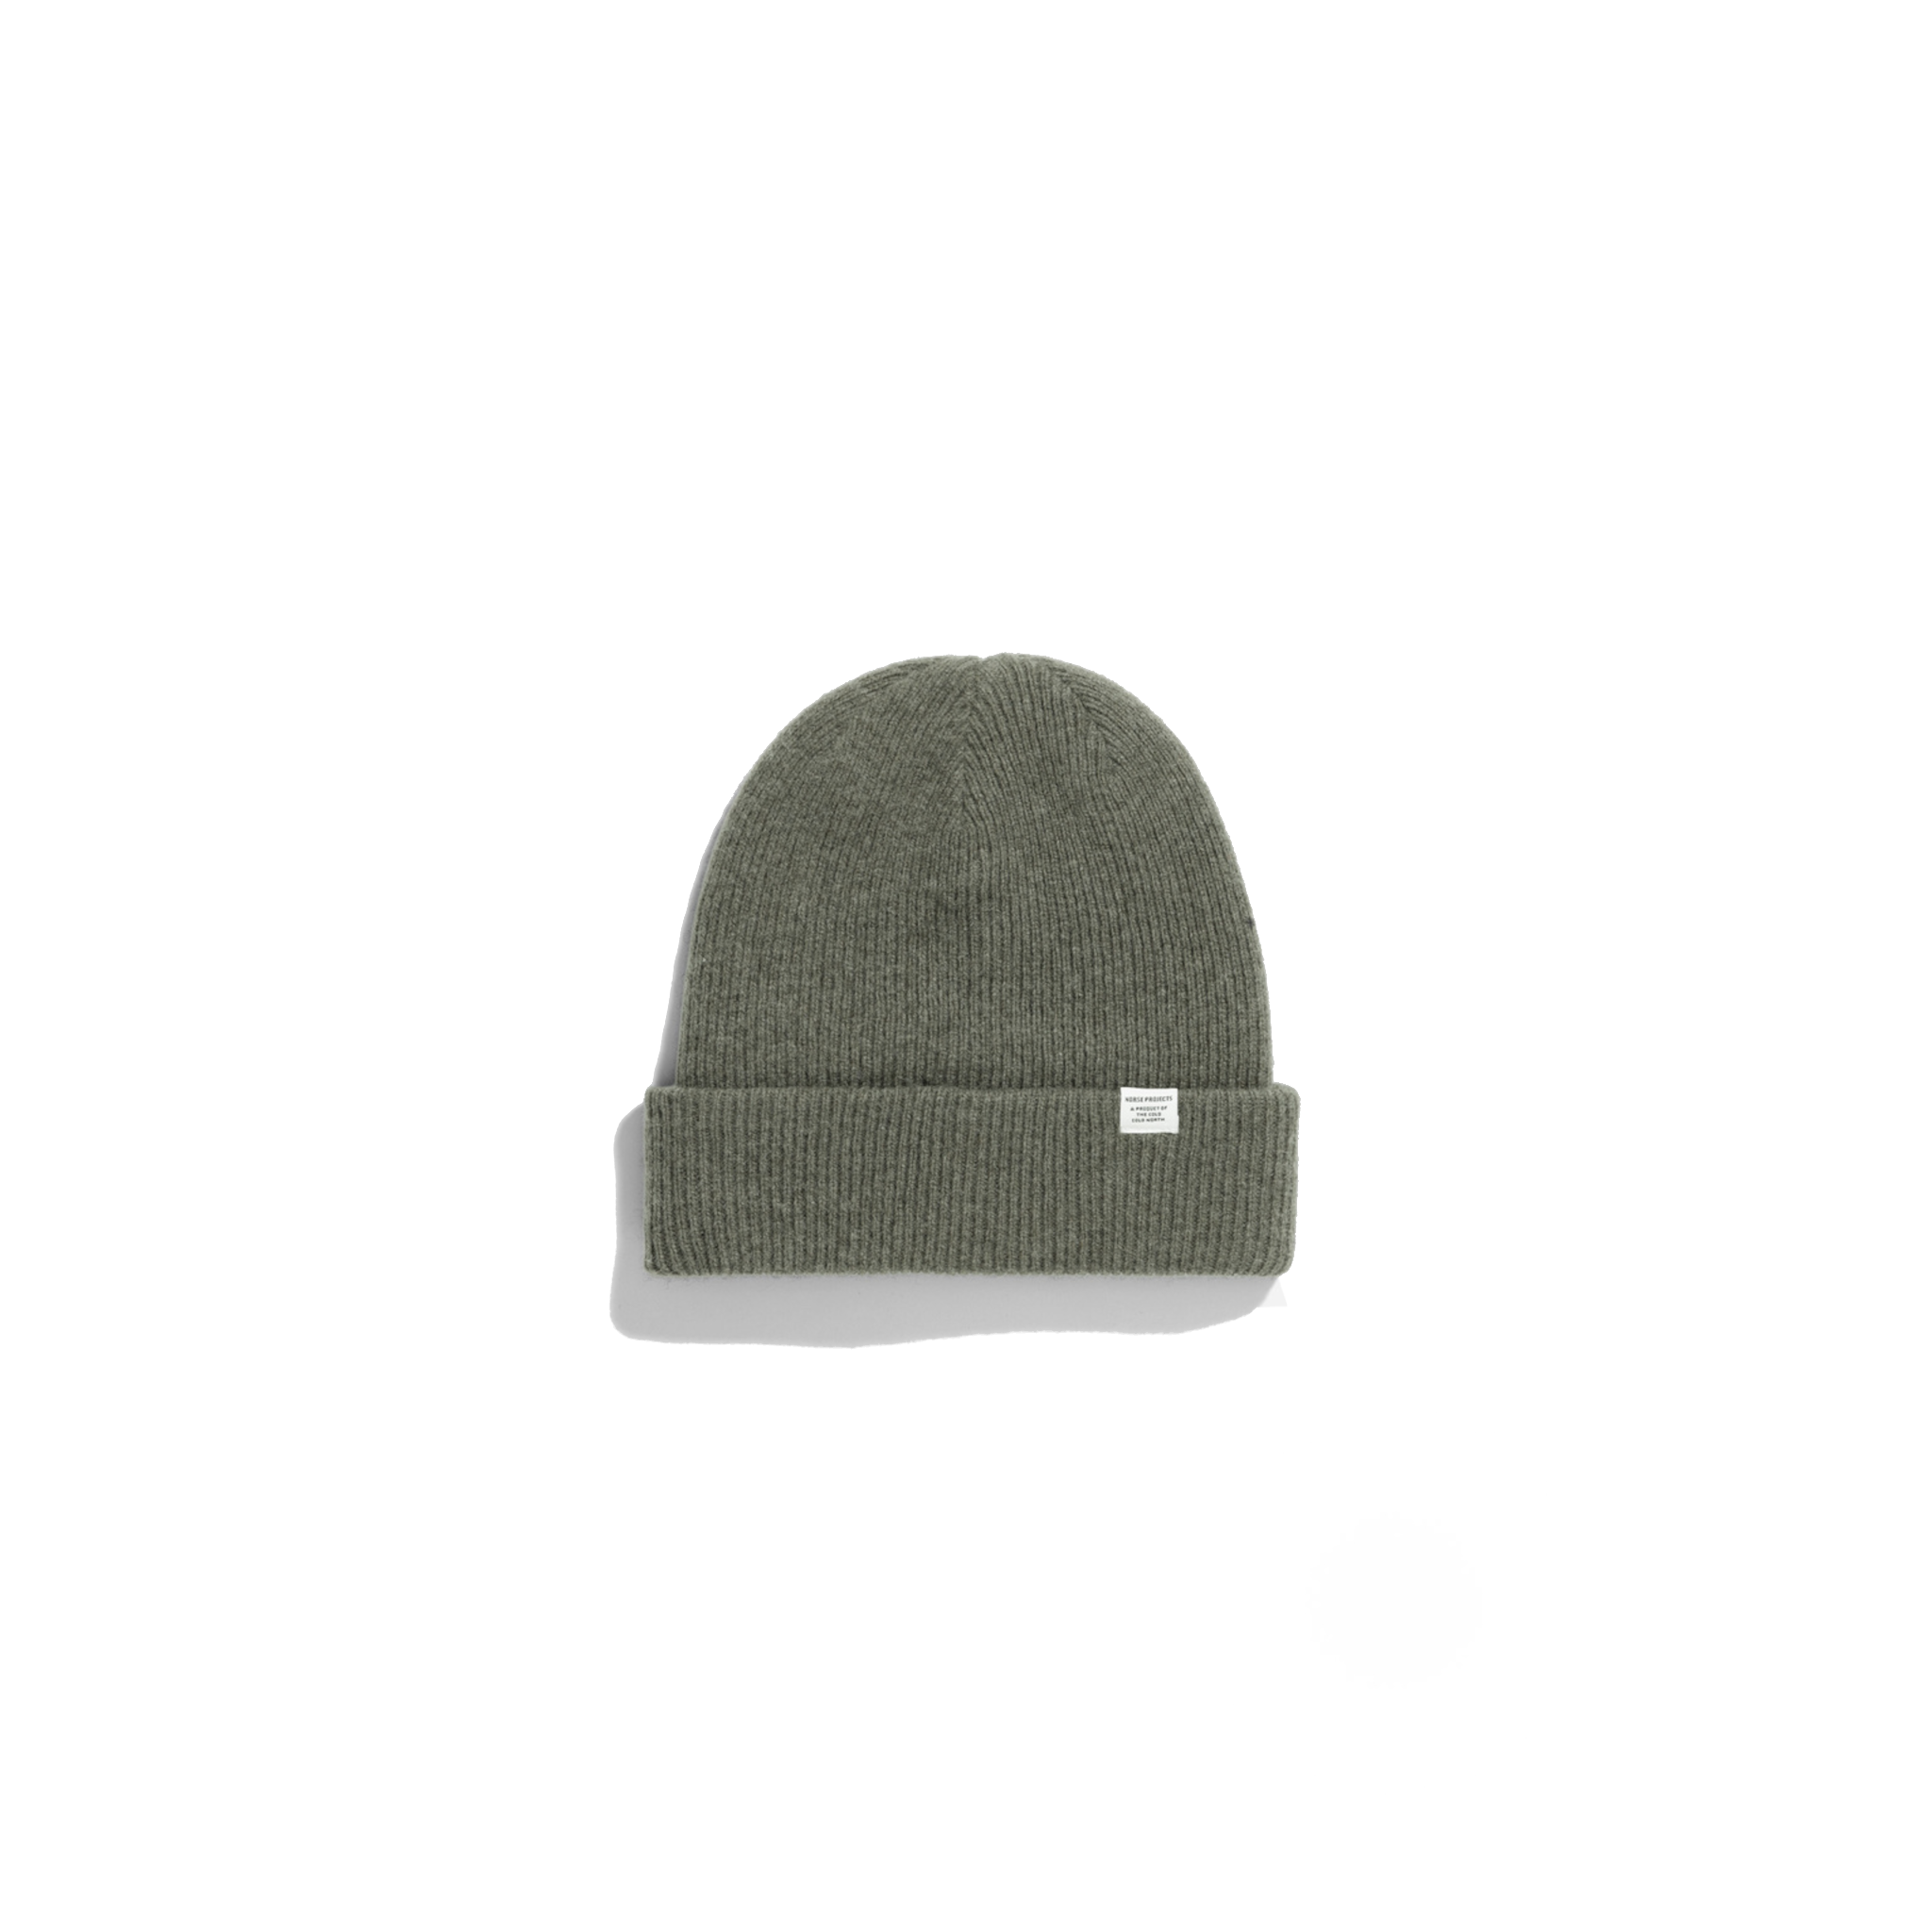 Merino Lambswool Beanie - Ivy Green-Norse Projects-W2 Store